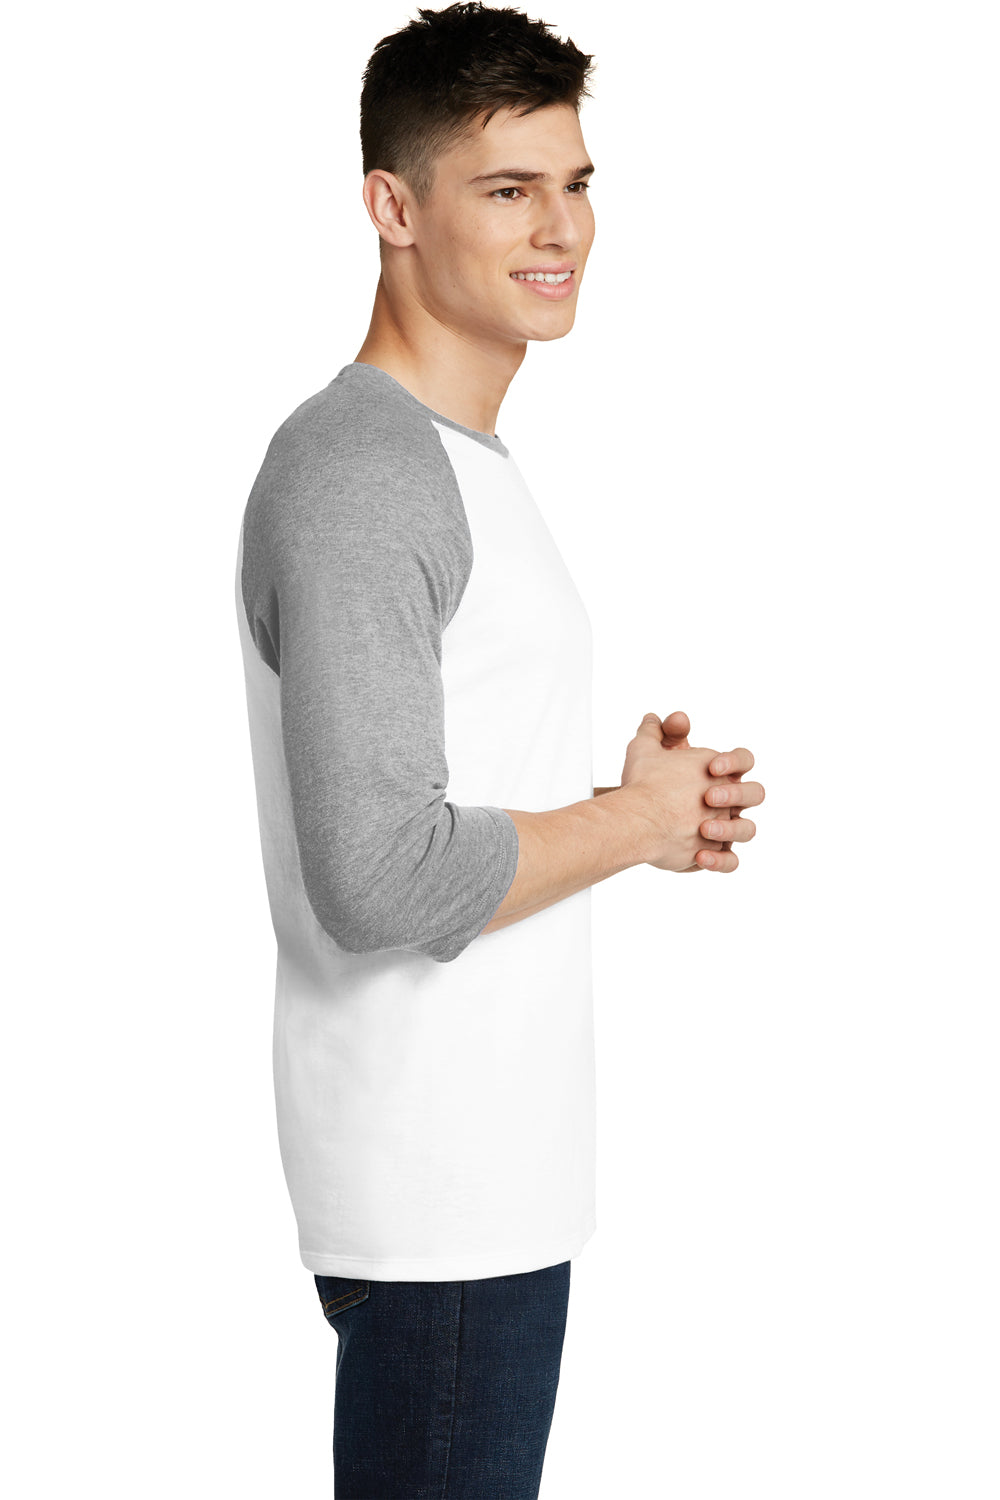 District DT6210 Mens Very Important 3/4 Sleeve Crewneck T-Shirt White/Heather Light Grey Side